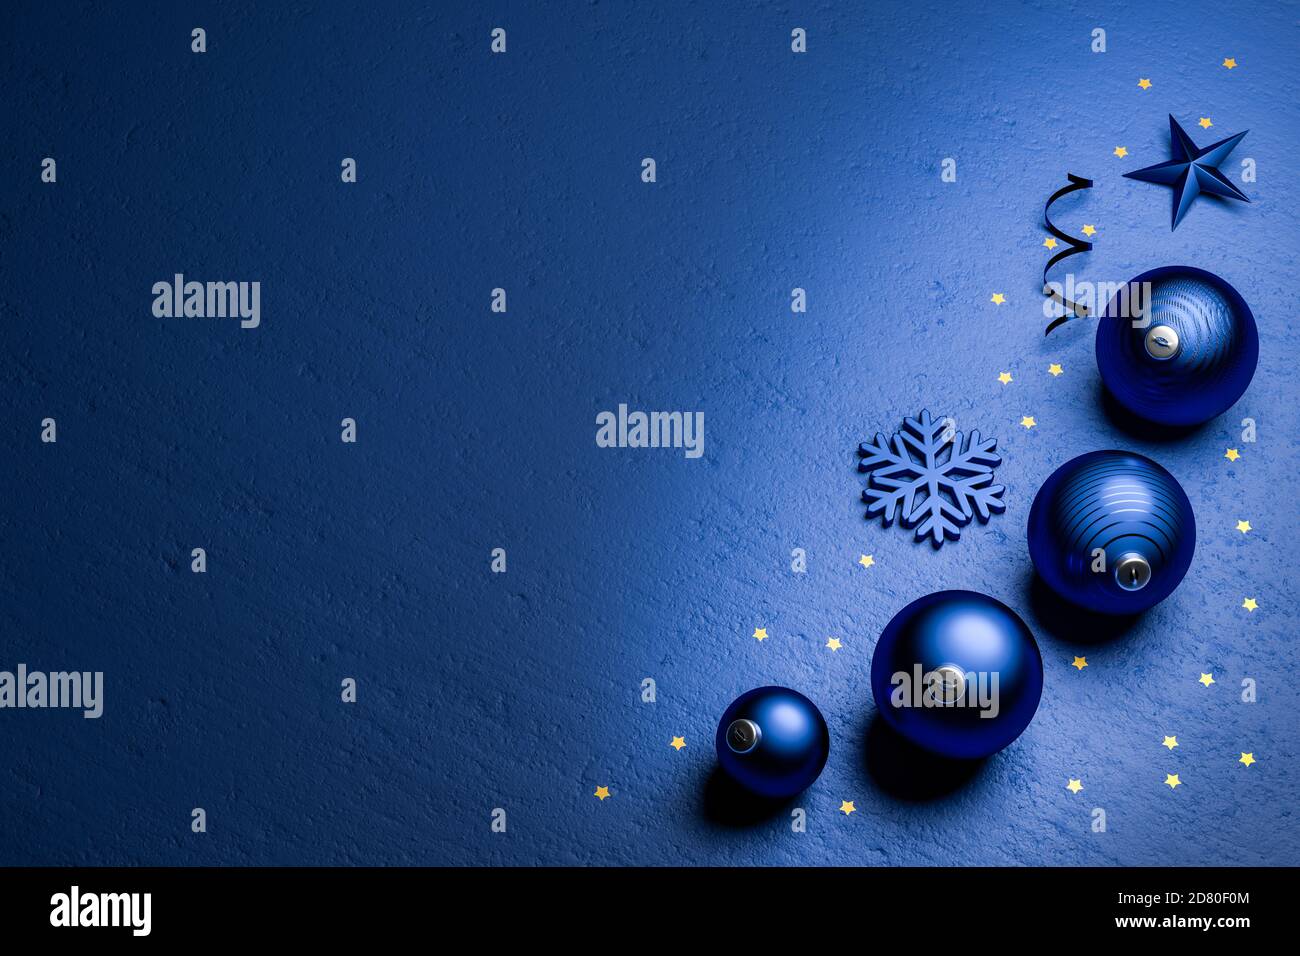 Classic Blue Christmas decoration on a classic blue stone background with small golden stars. Color of the year 2020. Copyspace Stock Photo